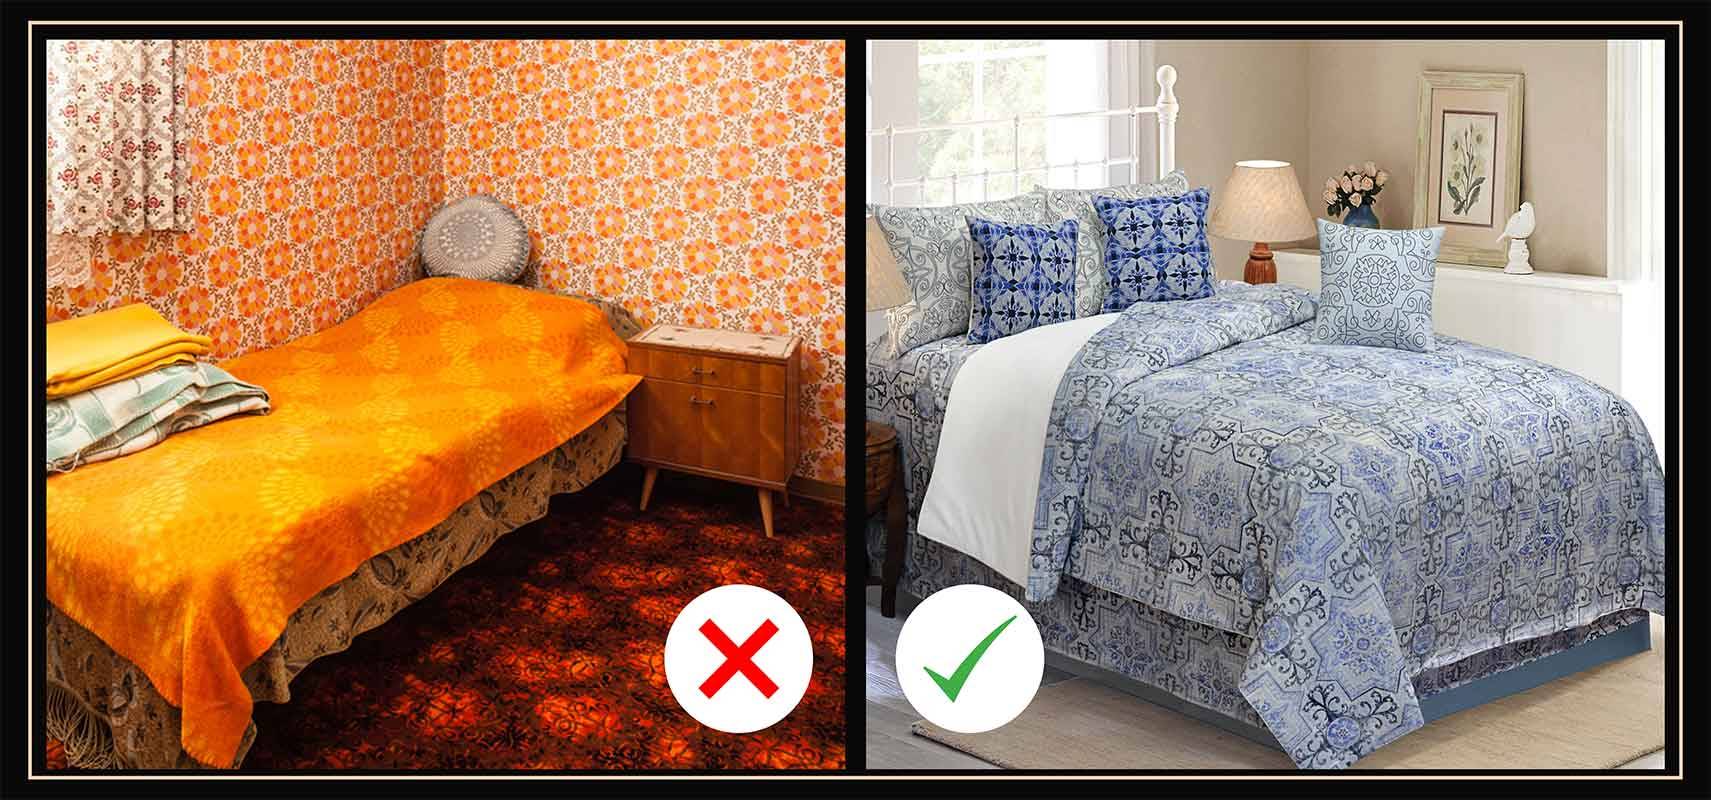 5 Things to Avoid in Home Decor